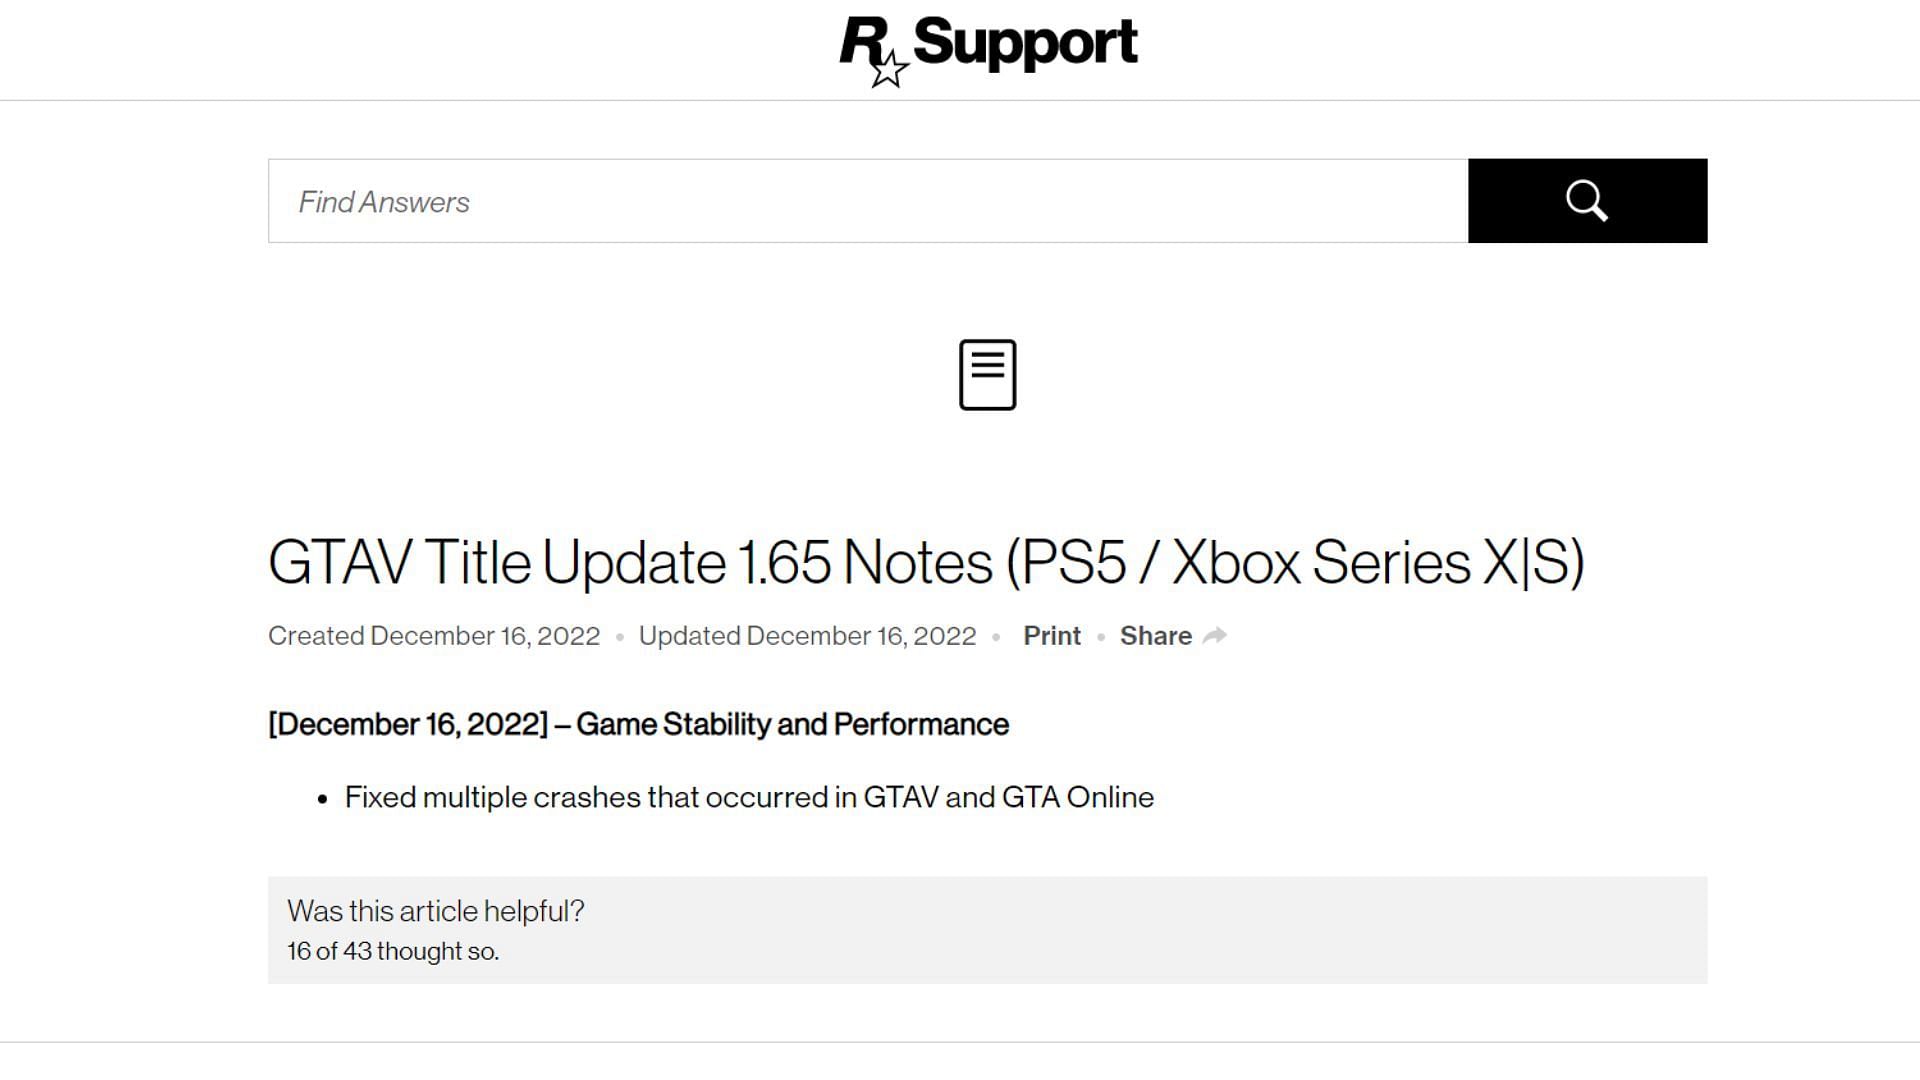 A new update 1.65 patch notes for GTA 5 (Image via Rockstar Support)